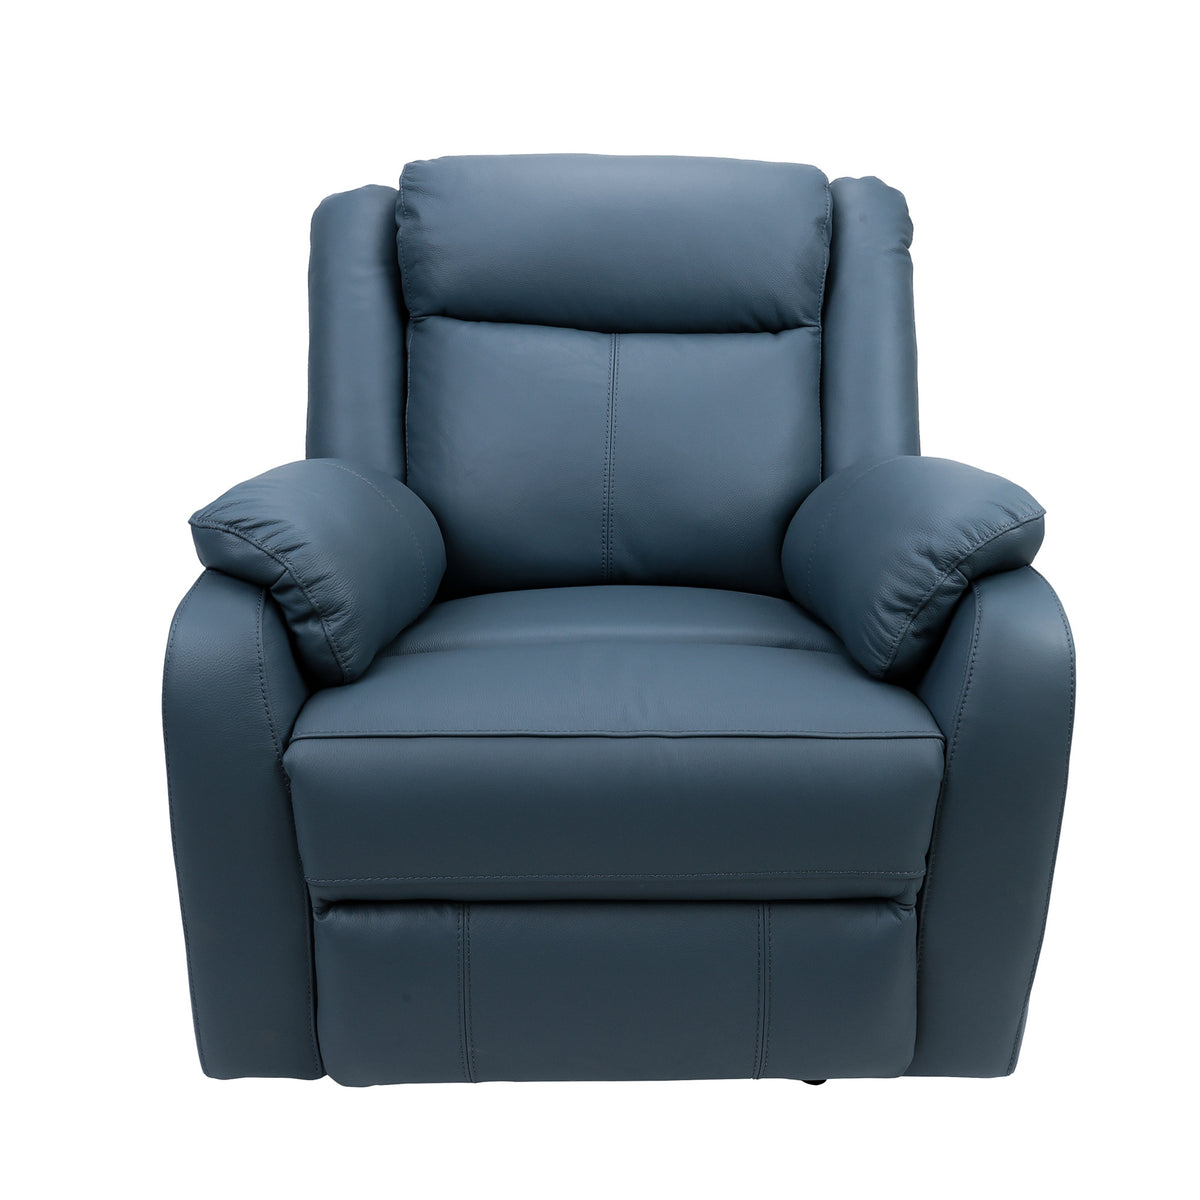 Bella 3+2+1 Seater Leather Electric Recliner Sofa Lounge Blue 